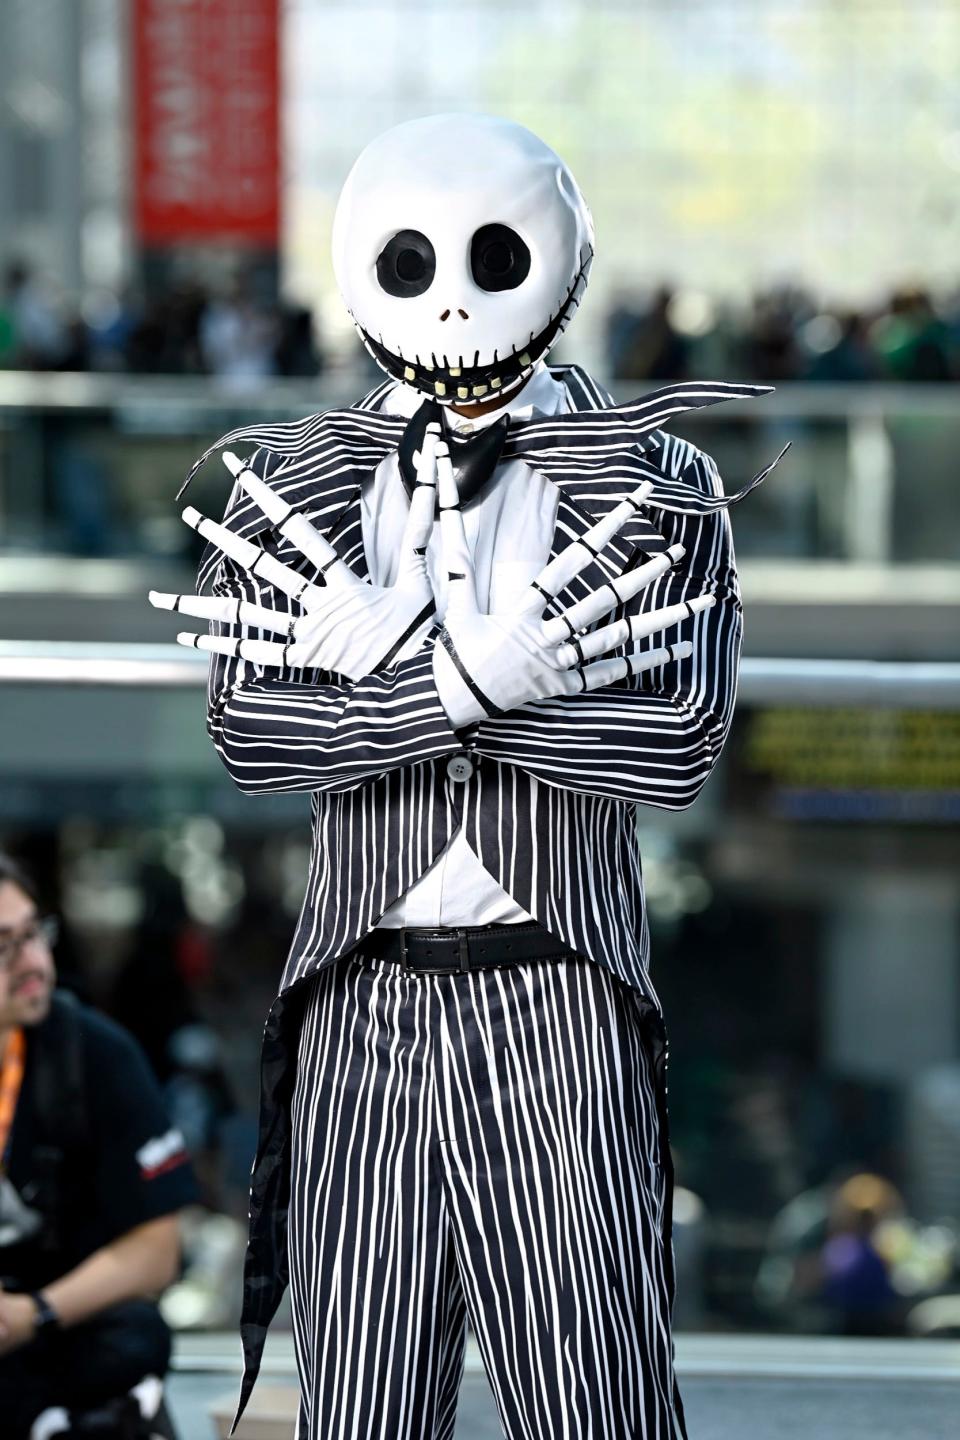 A Jack Skellington cosplayer at New York Comic Con 2022.